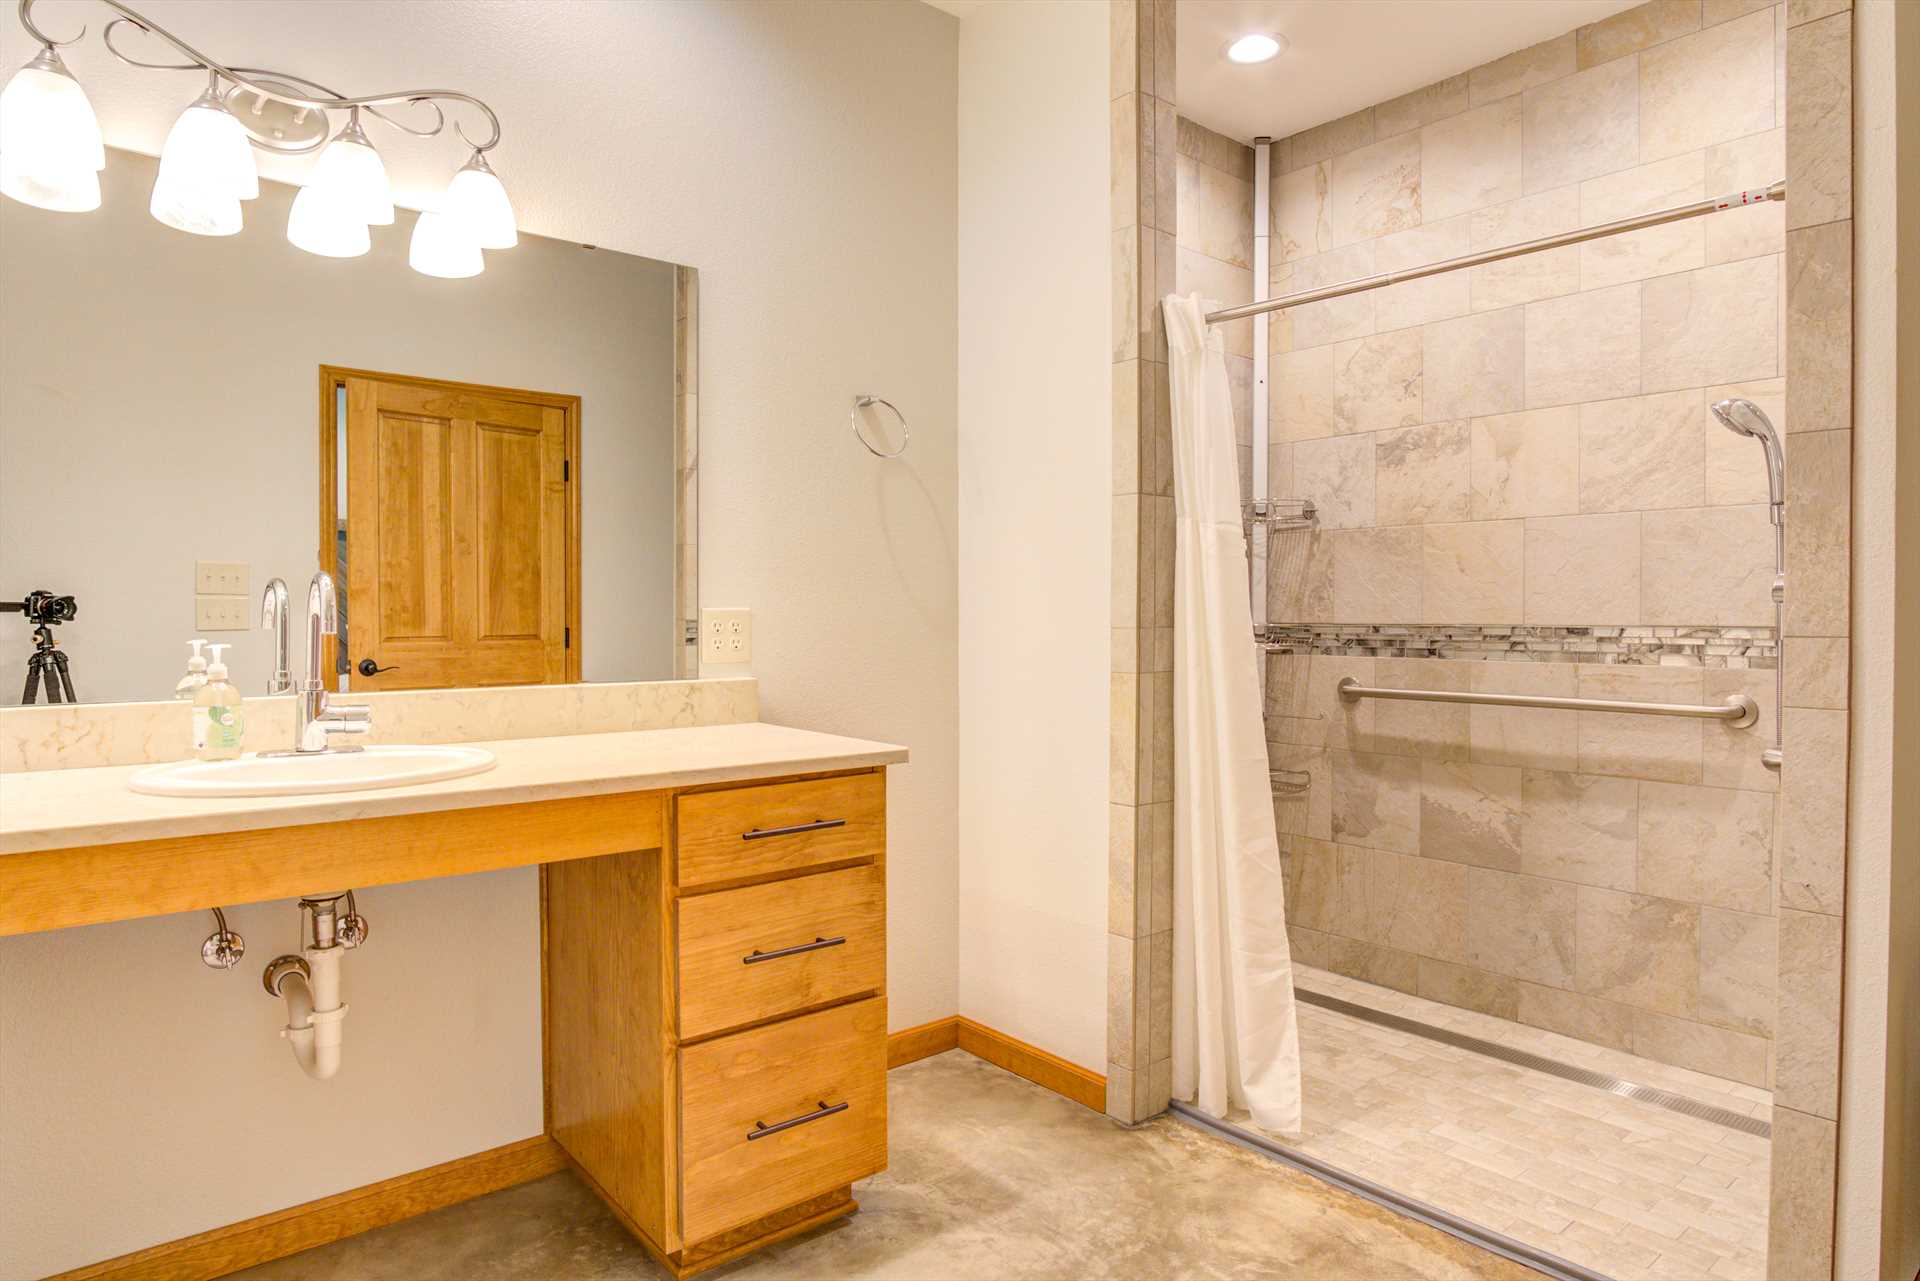                                                 The spacious showers and vanities in both master bathrooms are designed with full ADA compliance.